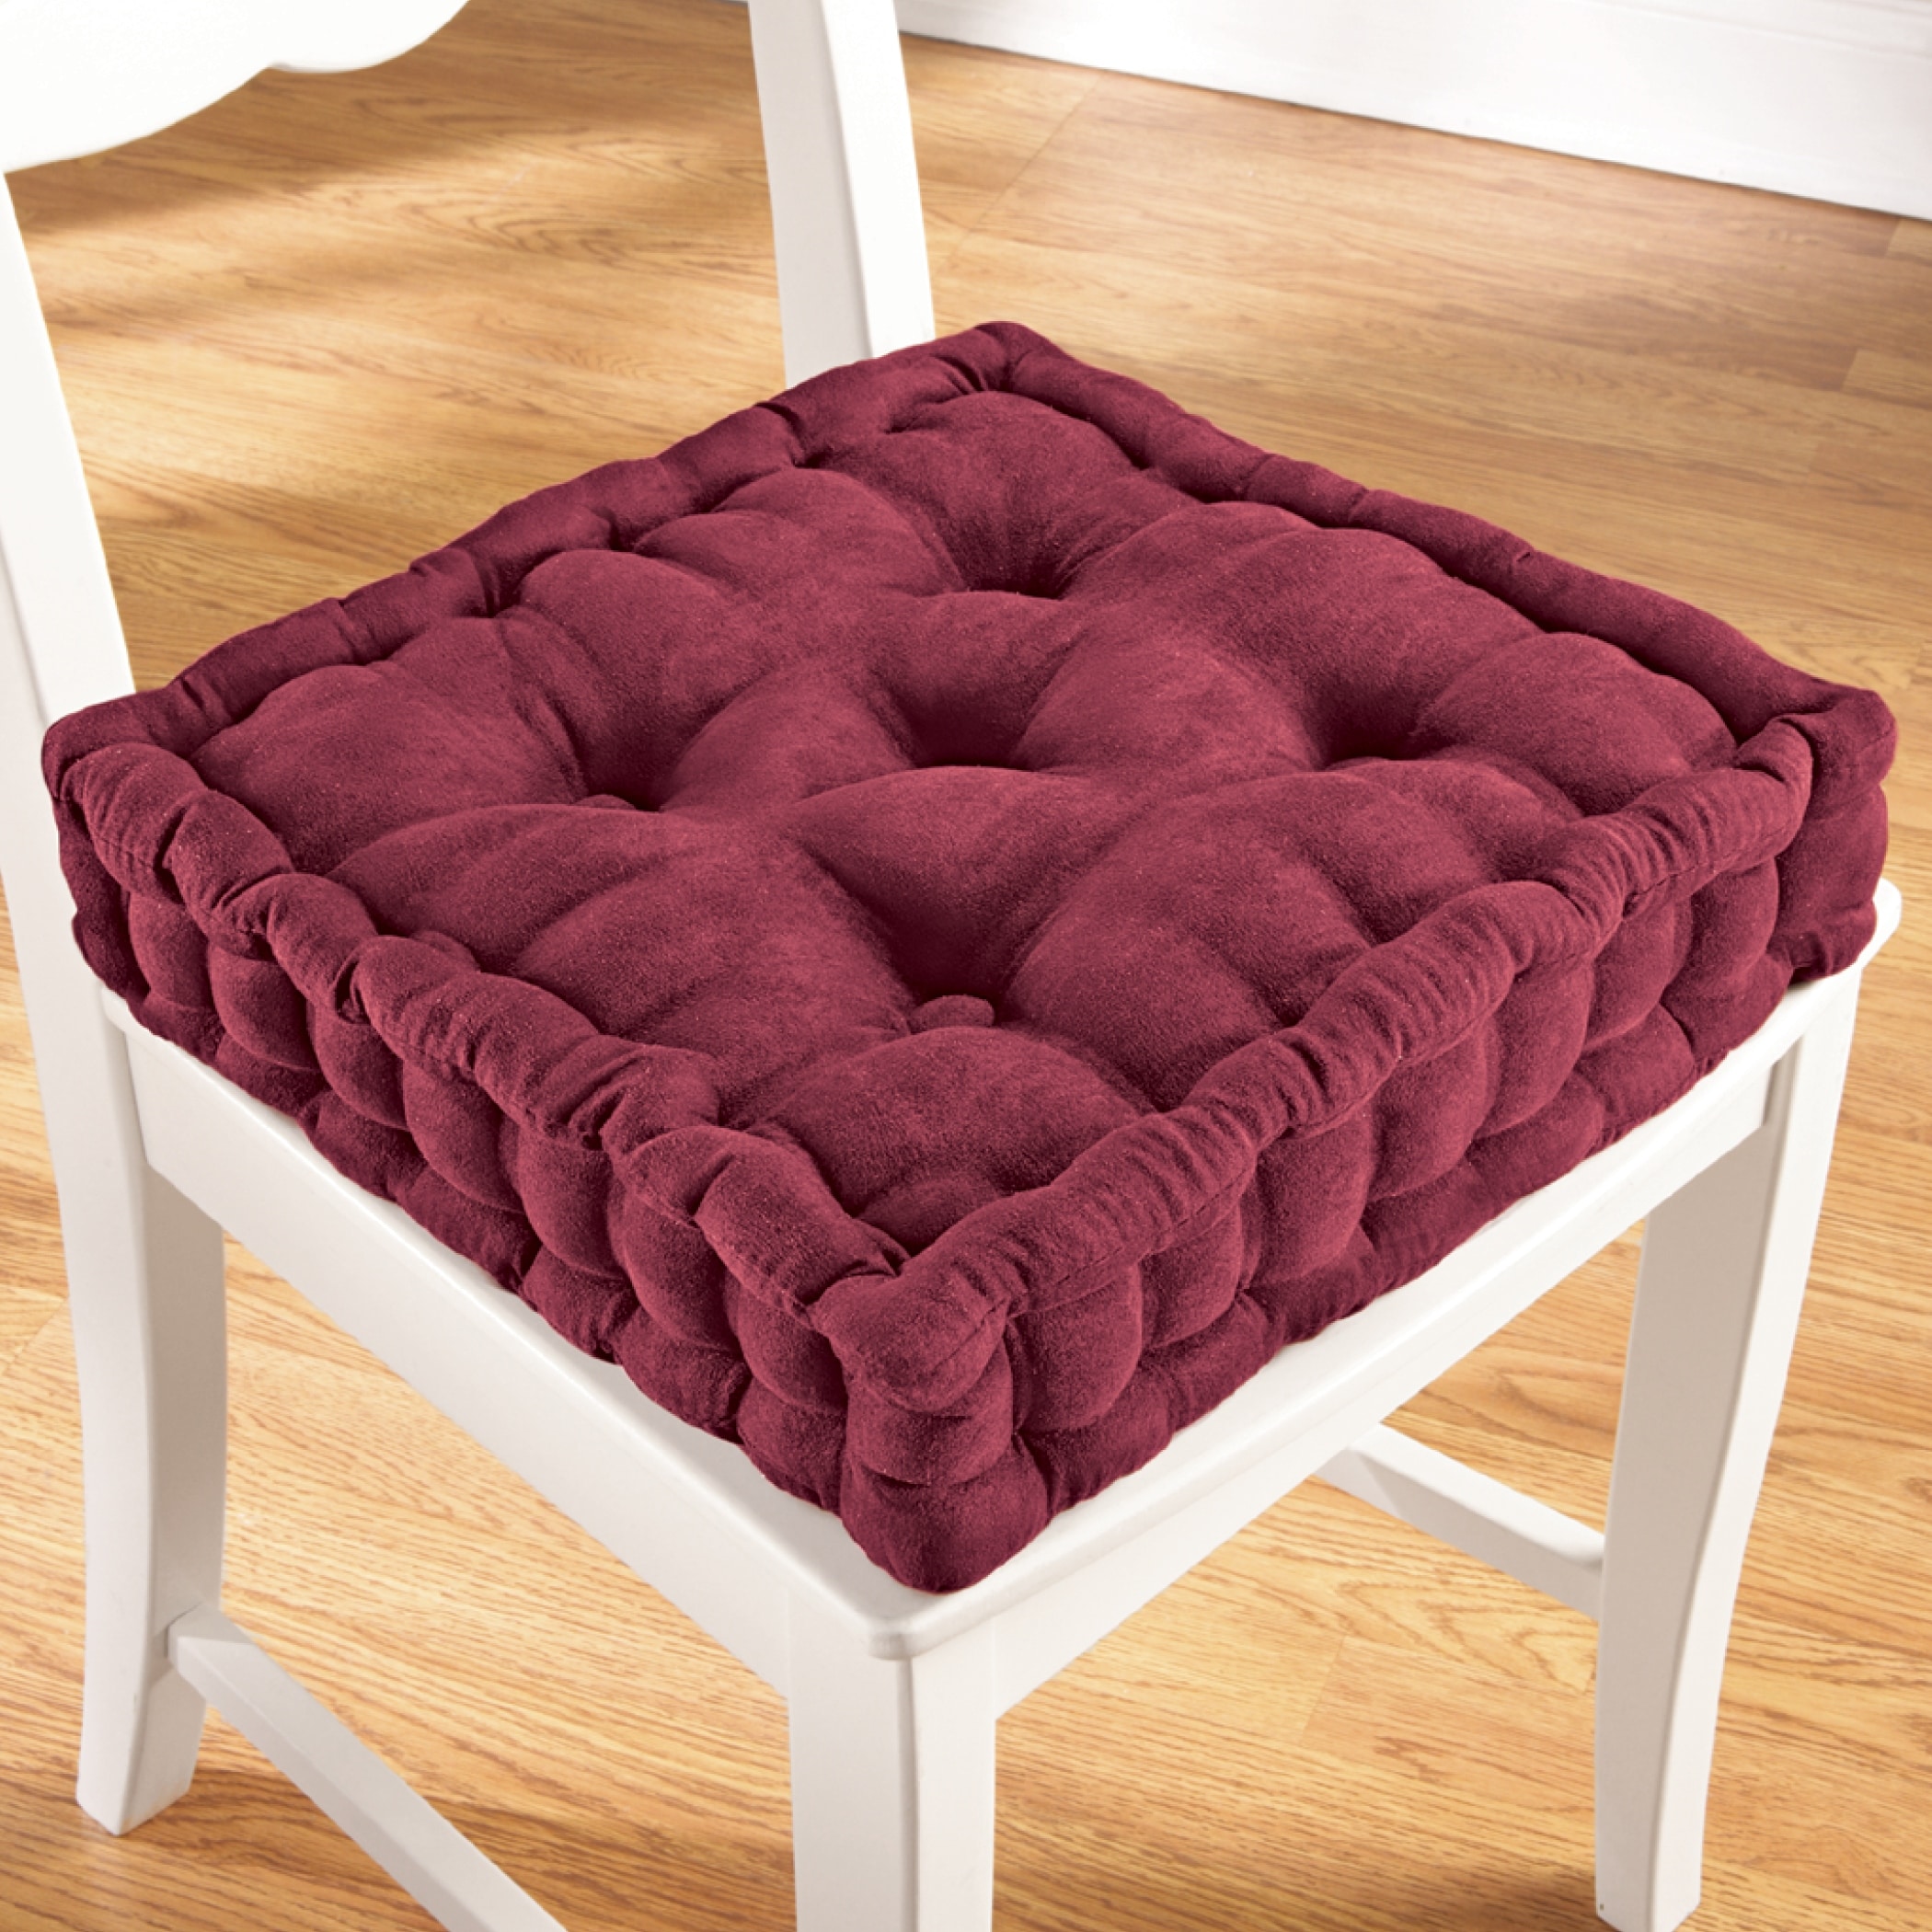 https://ak1.ostkcdn.com/images/products/is/images/direct/9f637ef22e9d5262e836f0ea97d0170c5bd110d8/Tufted-Support-Padded-Booster-Cushion.jpg